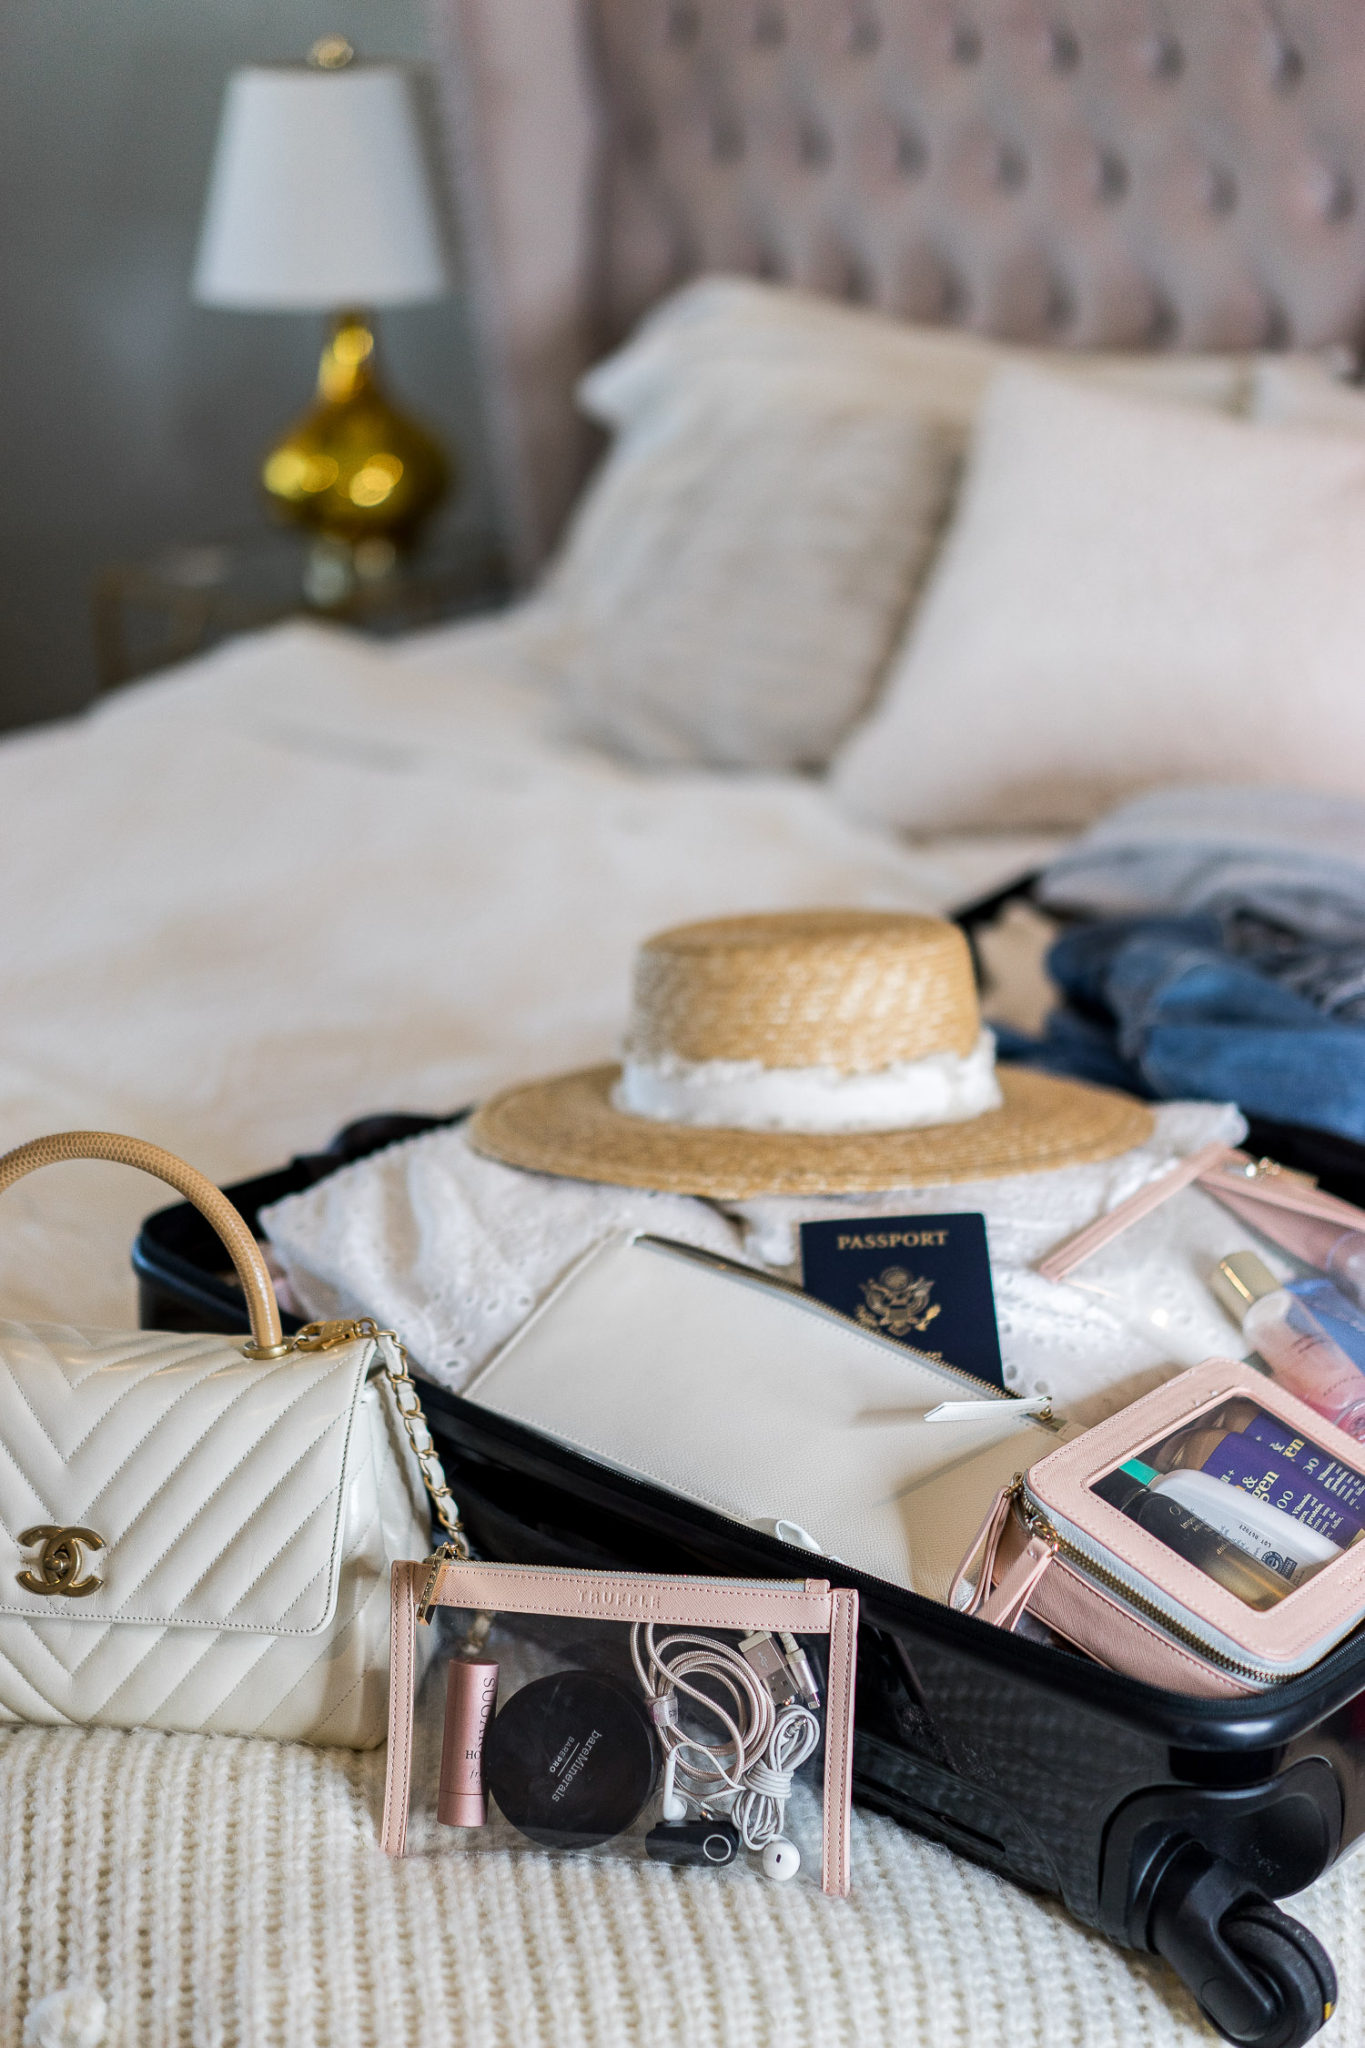 Packing for International Travel: Top 10 Tips